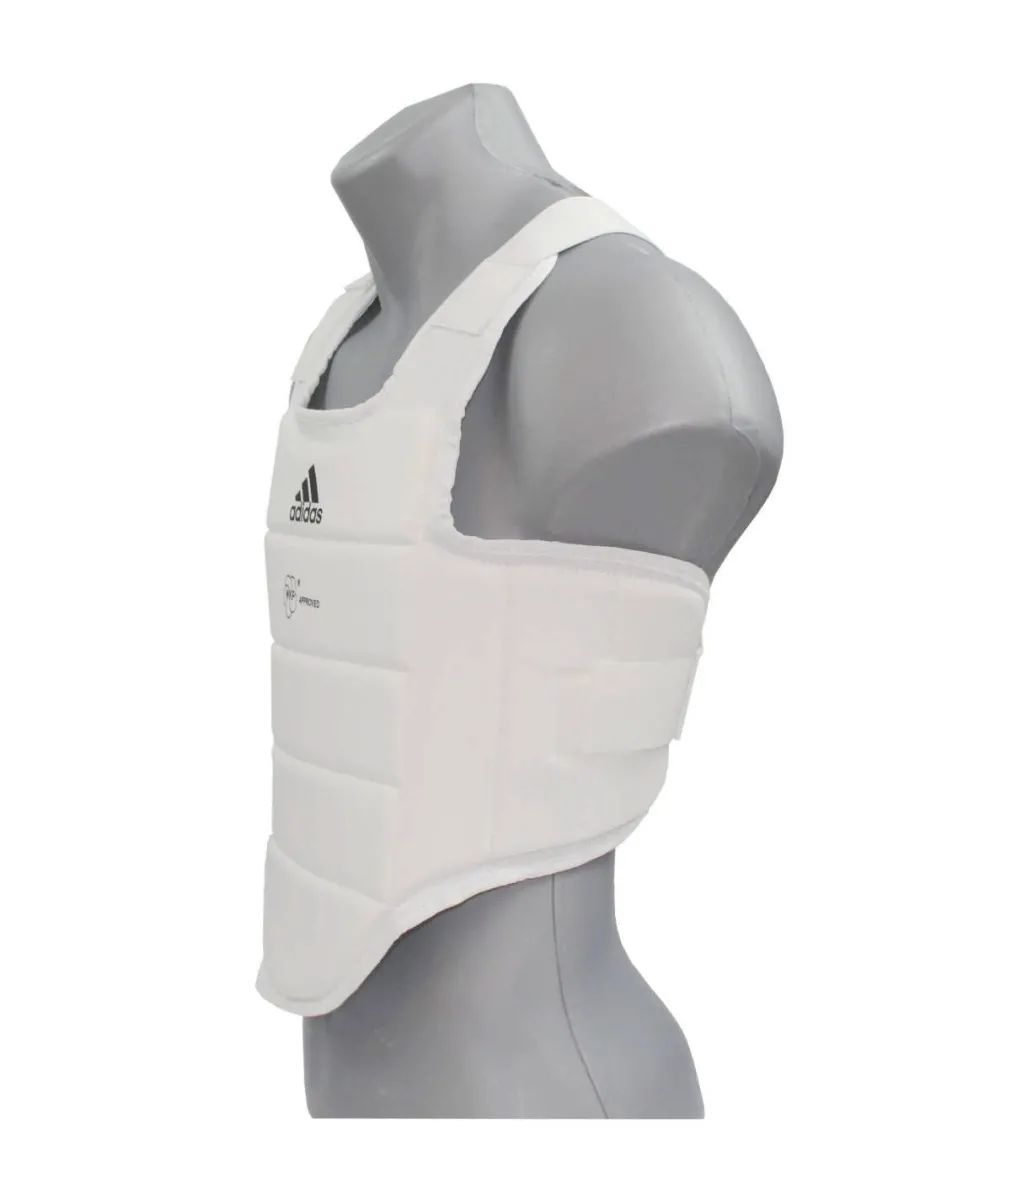 adidas Bodyprotector WKF approved